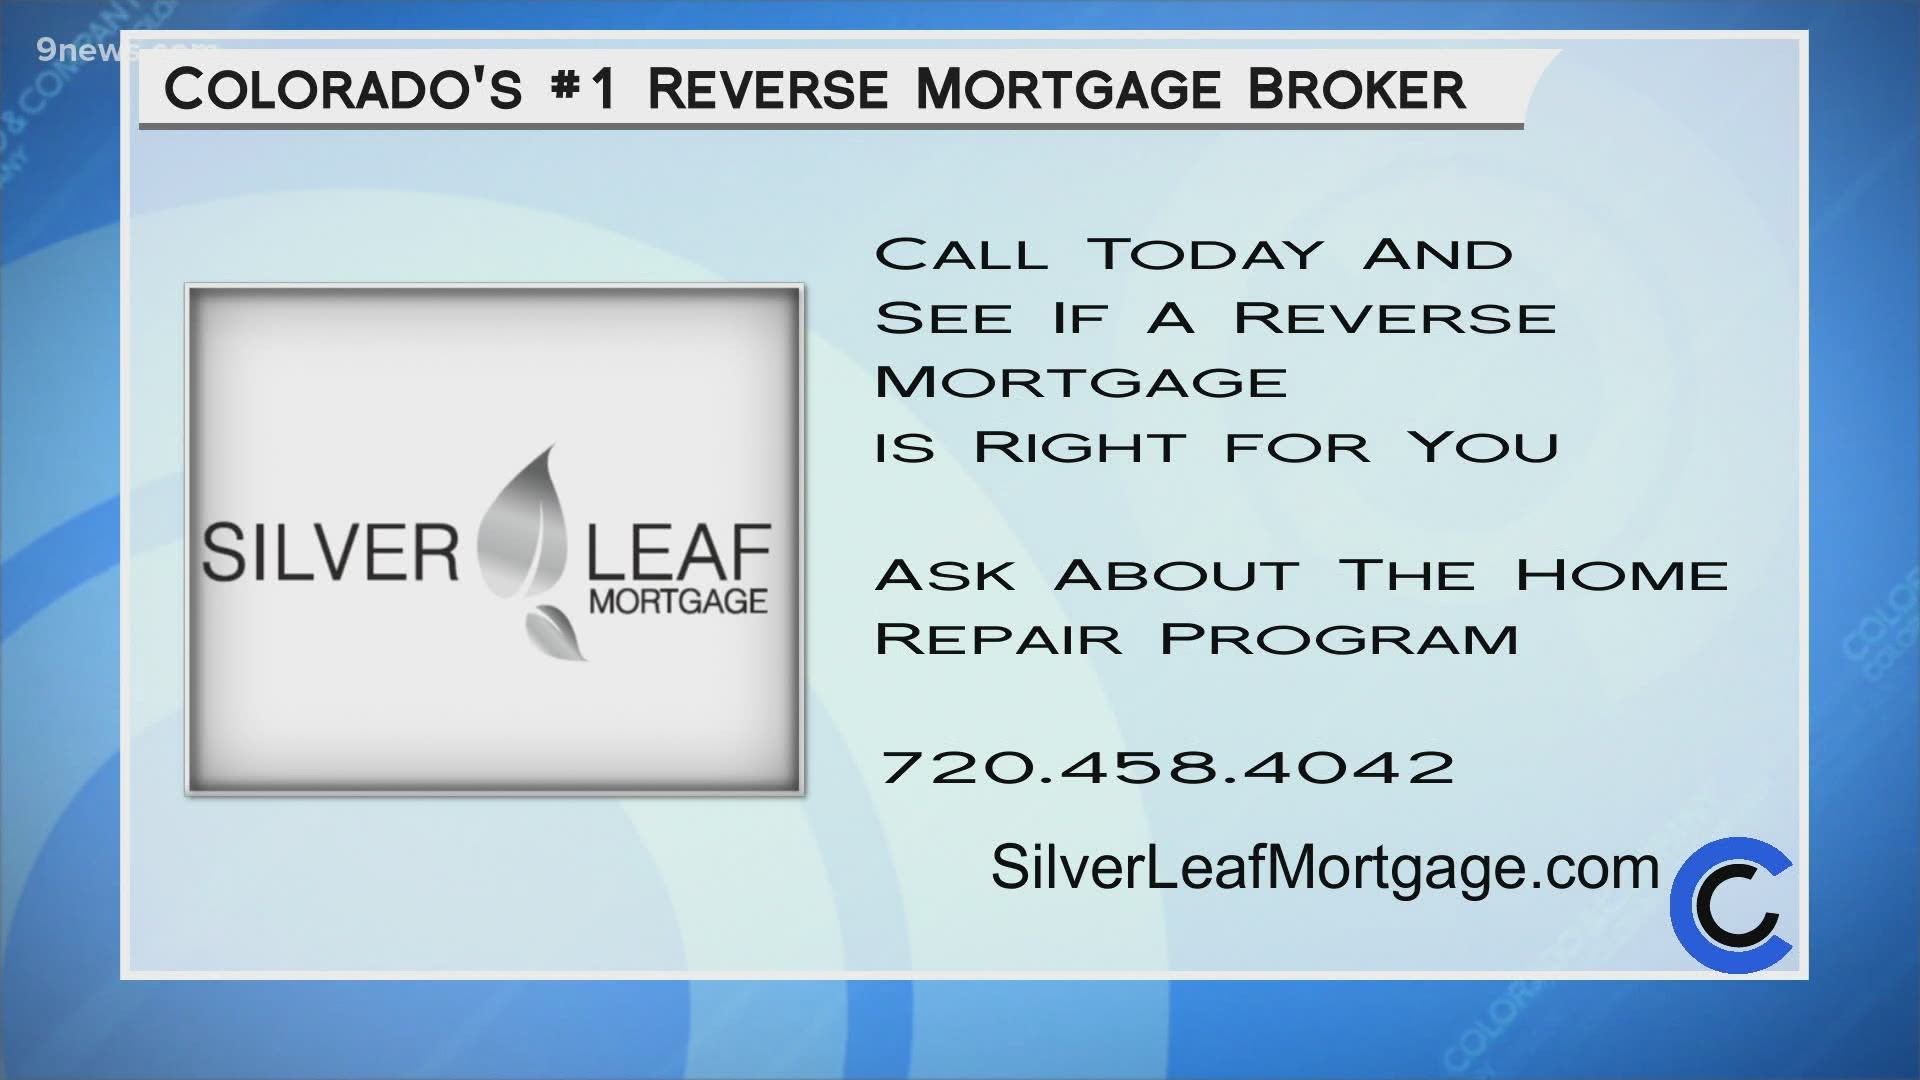 Call 720.458.4042 or visit SilverLeafMortgage.com to find out if a reverse mortgage is the right choice for you.